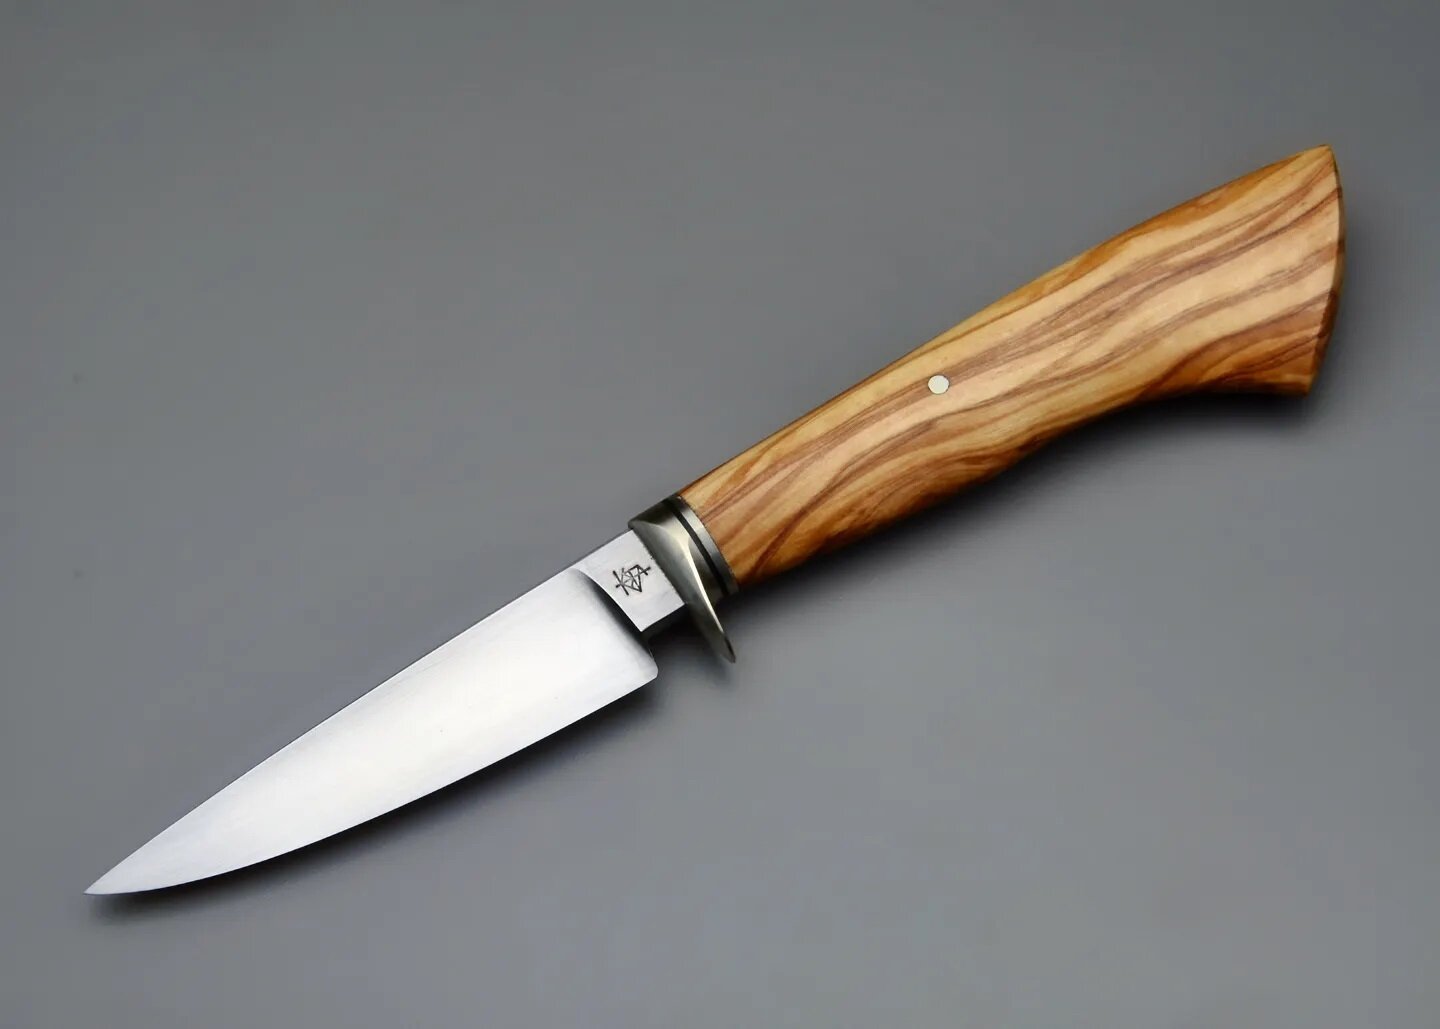 3.75&quot; hollow ground hunter in w2 and olive, with nickel silver guard.
This one's available!

#hunting #outdoors #fishing #whitetail #knife #customknife